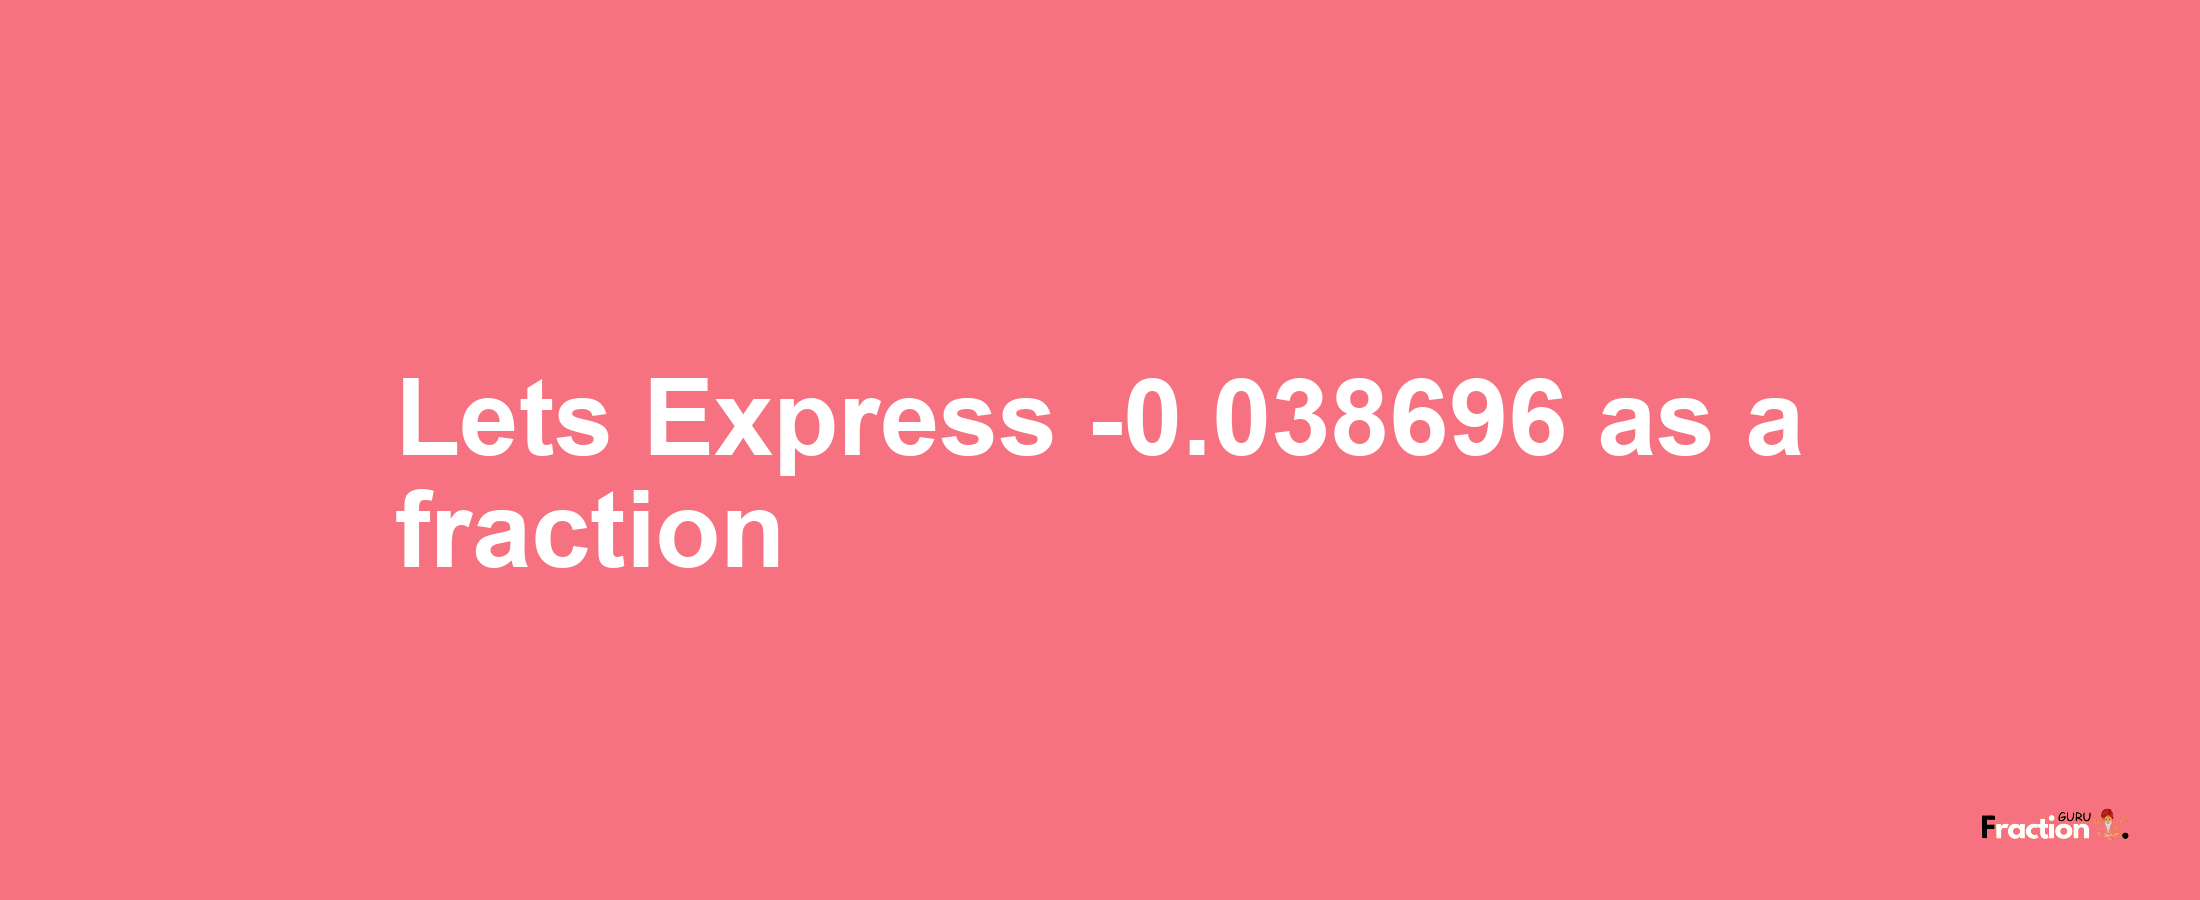 Lets Express -0.038696 as afraction